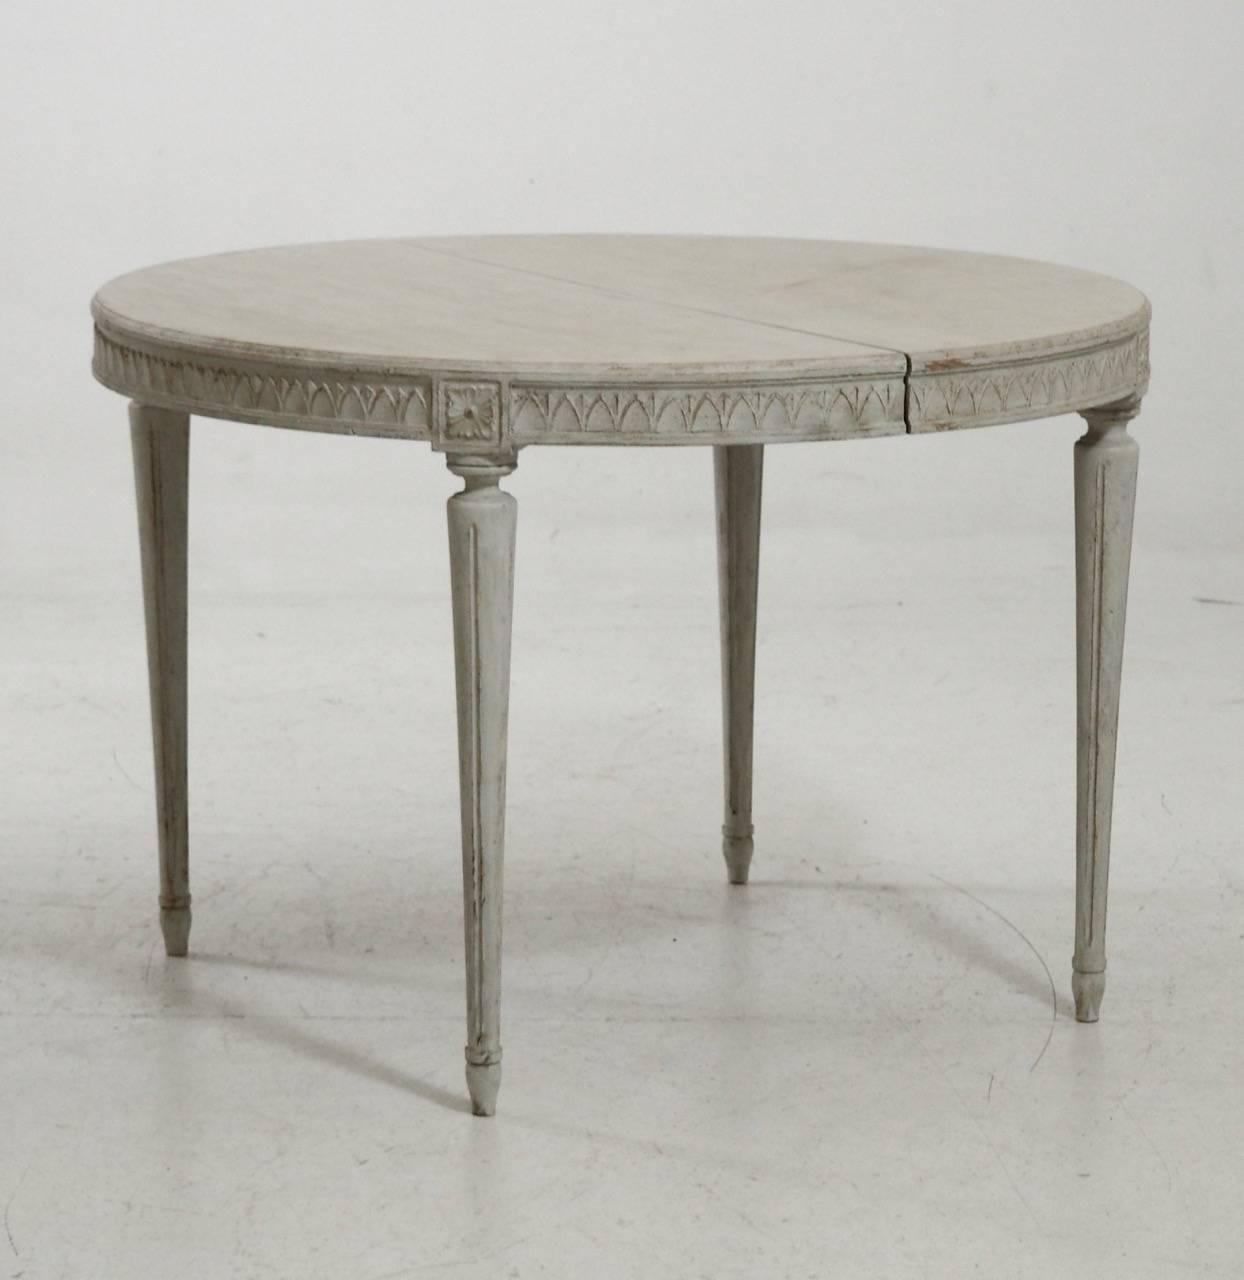 A charming Swedish three-leaf oval dining table in the Gustavian style.  The patina is a blend of light gray and aged white.  There is beautiful carved egg and dart molding around the apron with a carved floral motif above each round, tapered, and